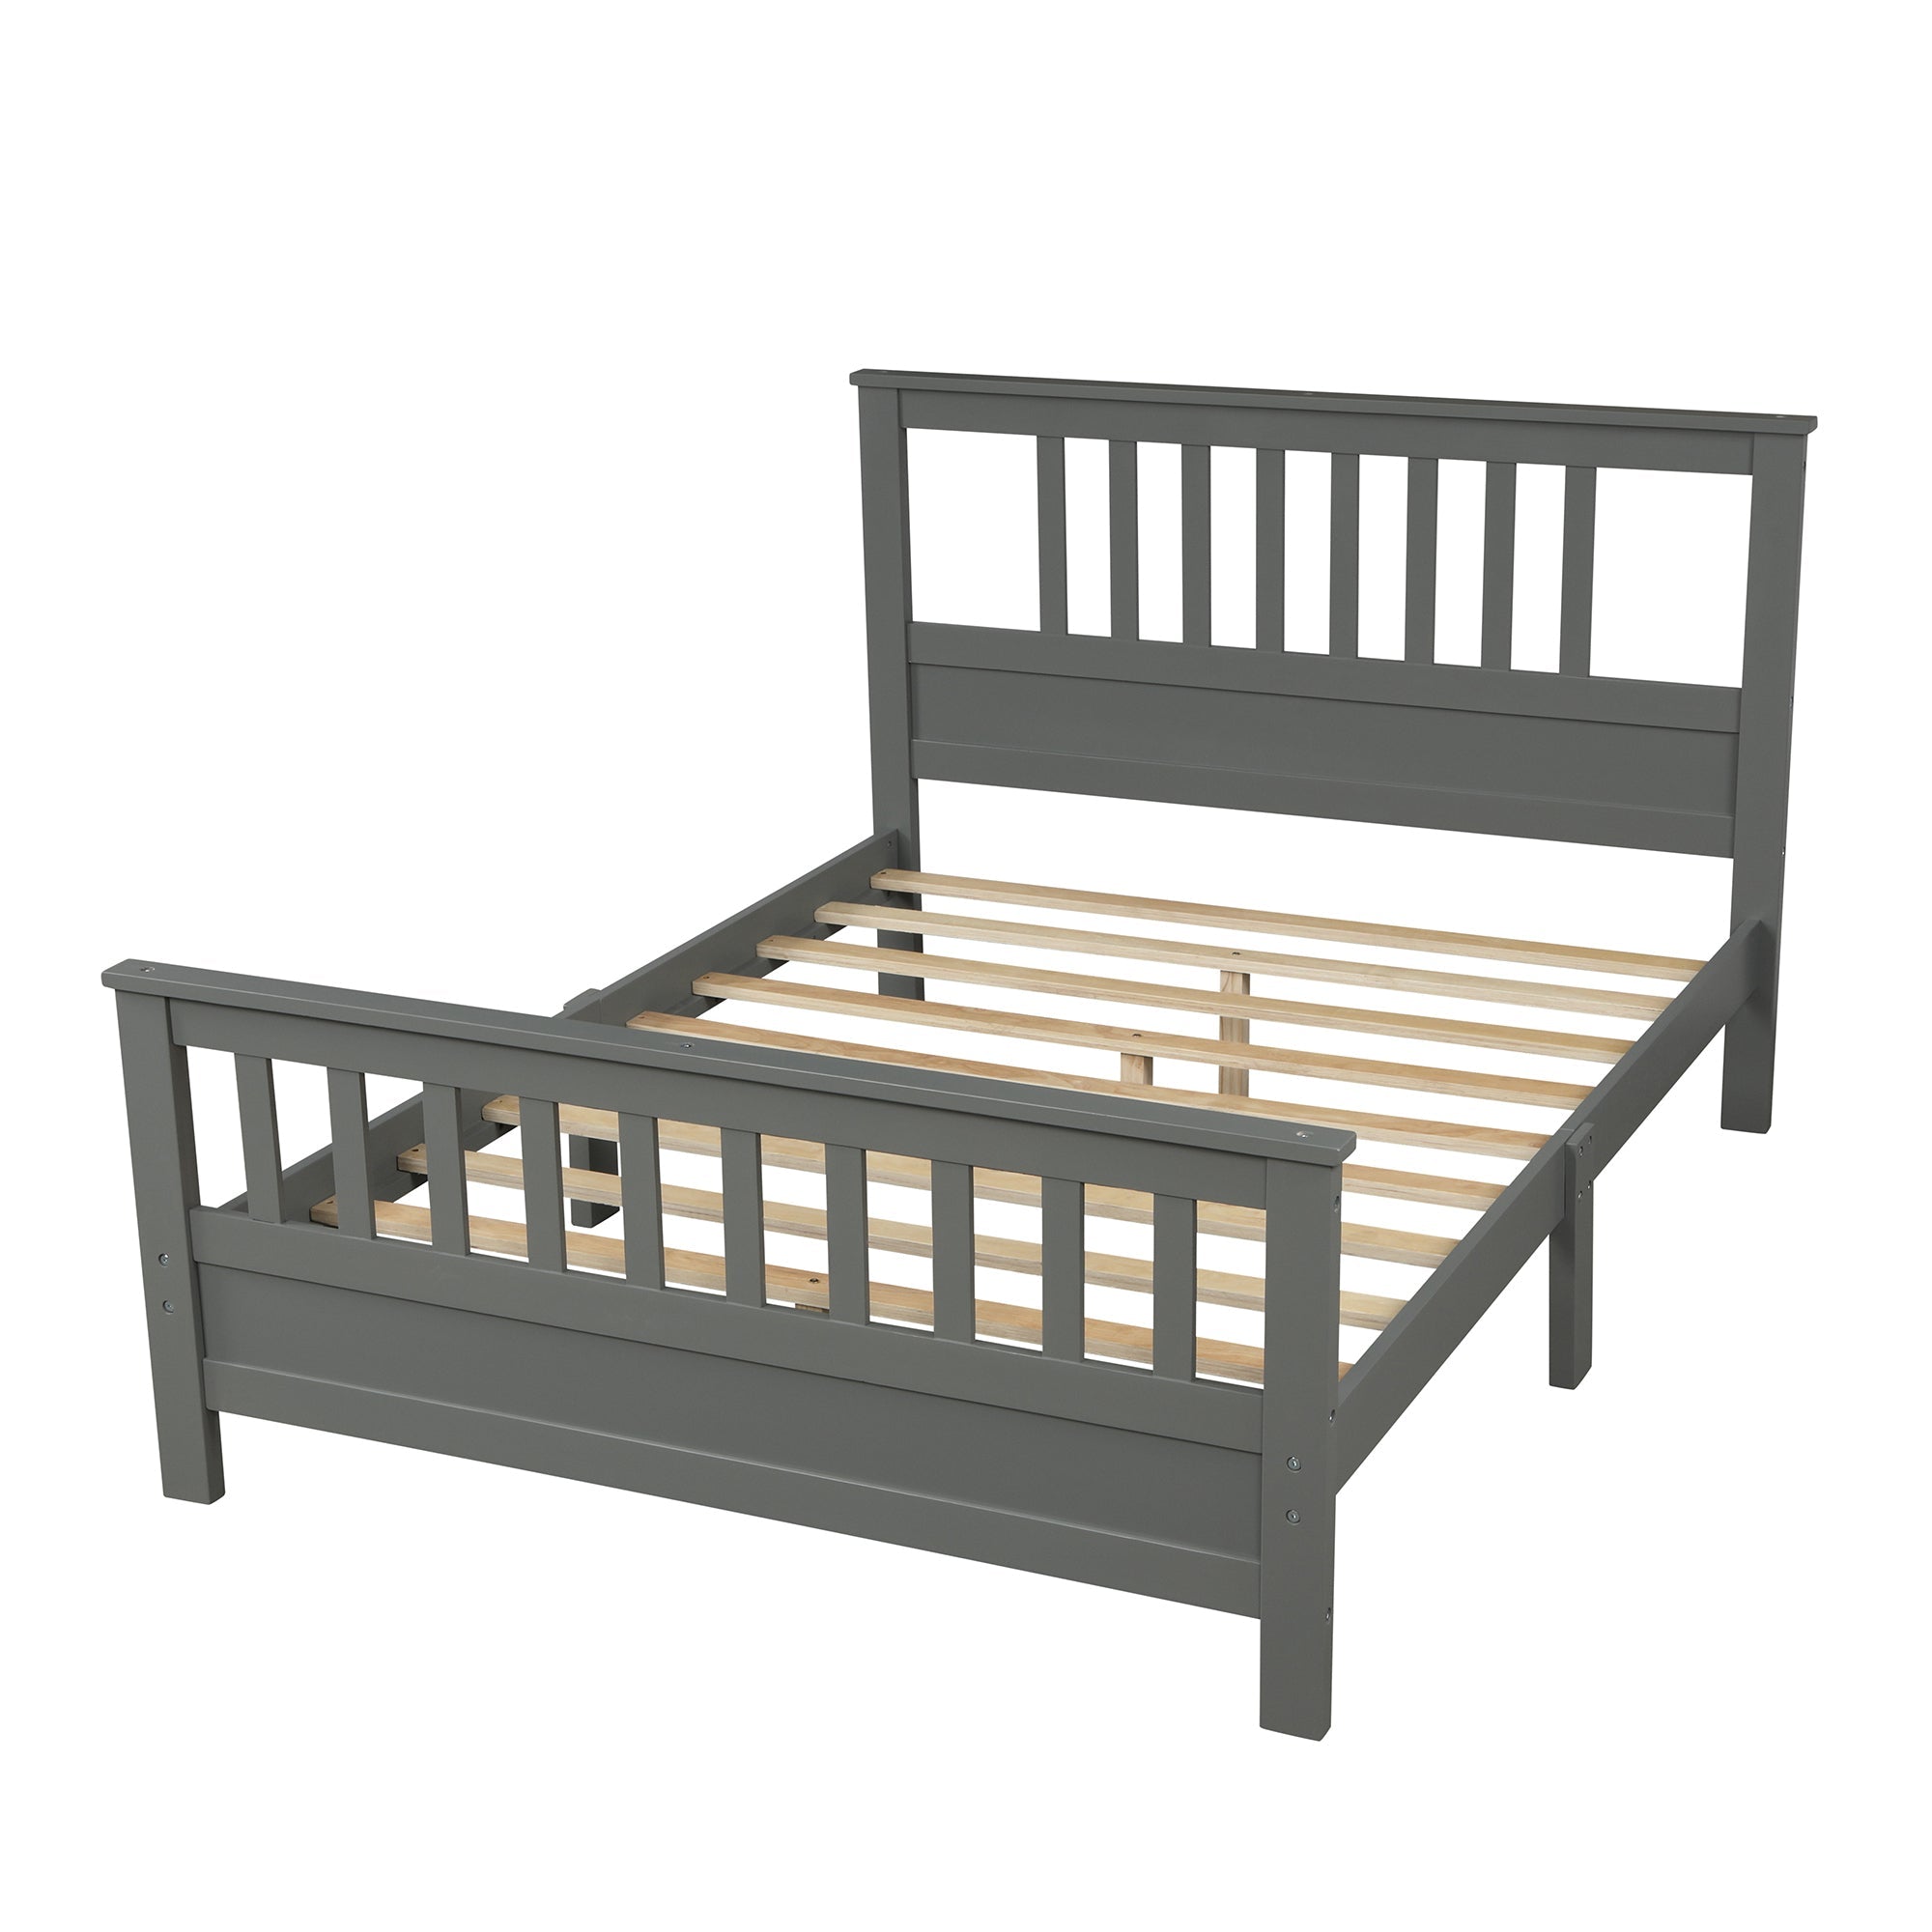 Gray Full Wood Platform Bed with Headboard & Footboard - Sturdy Support, No Box Spring Needed